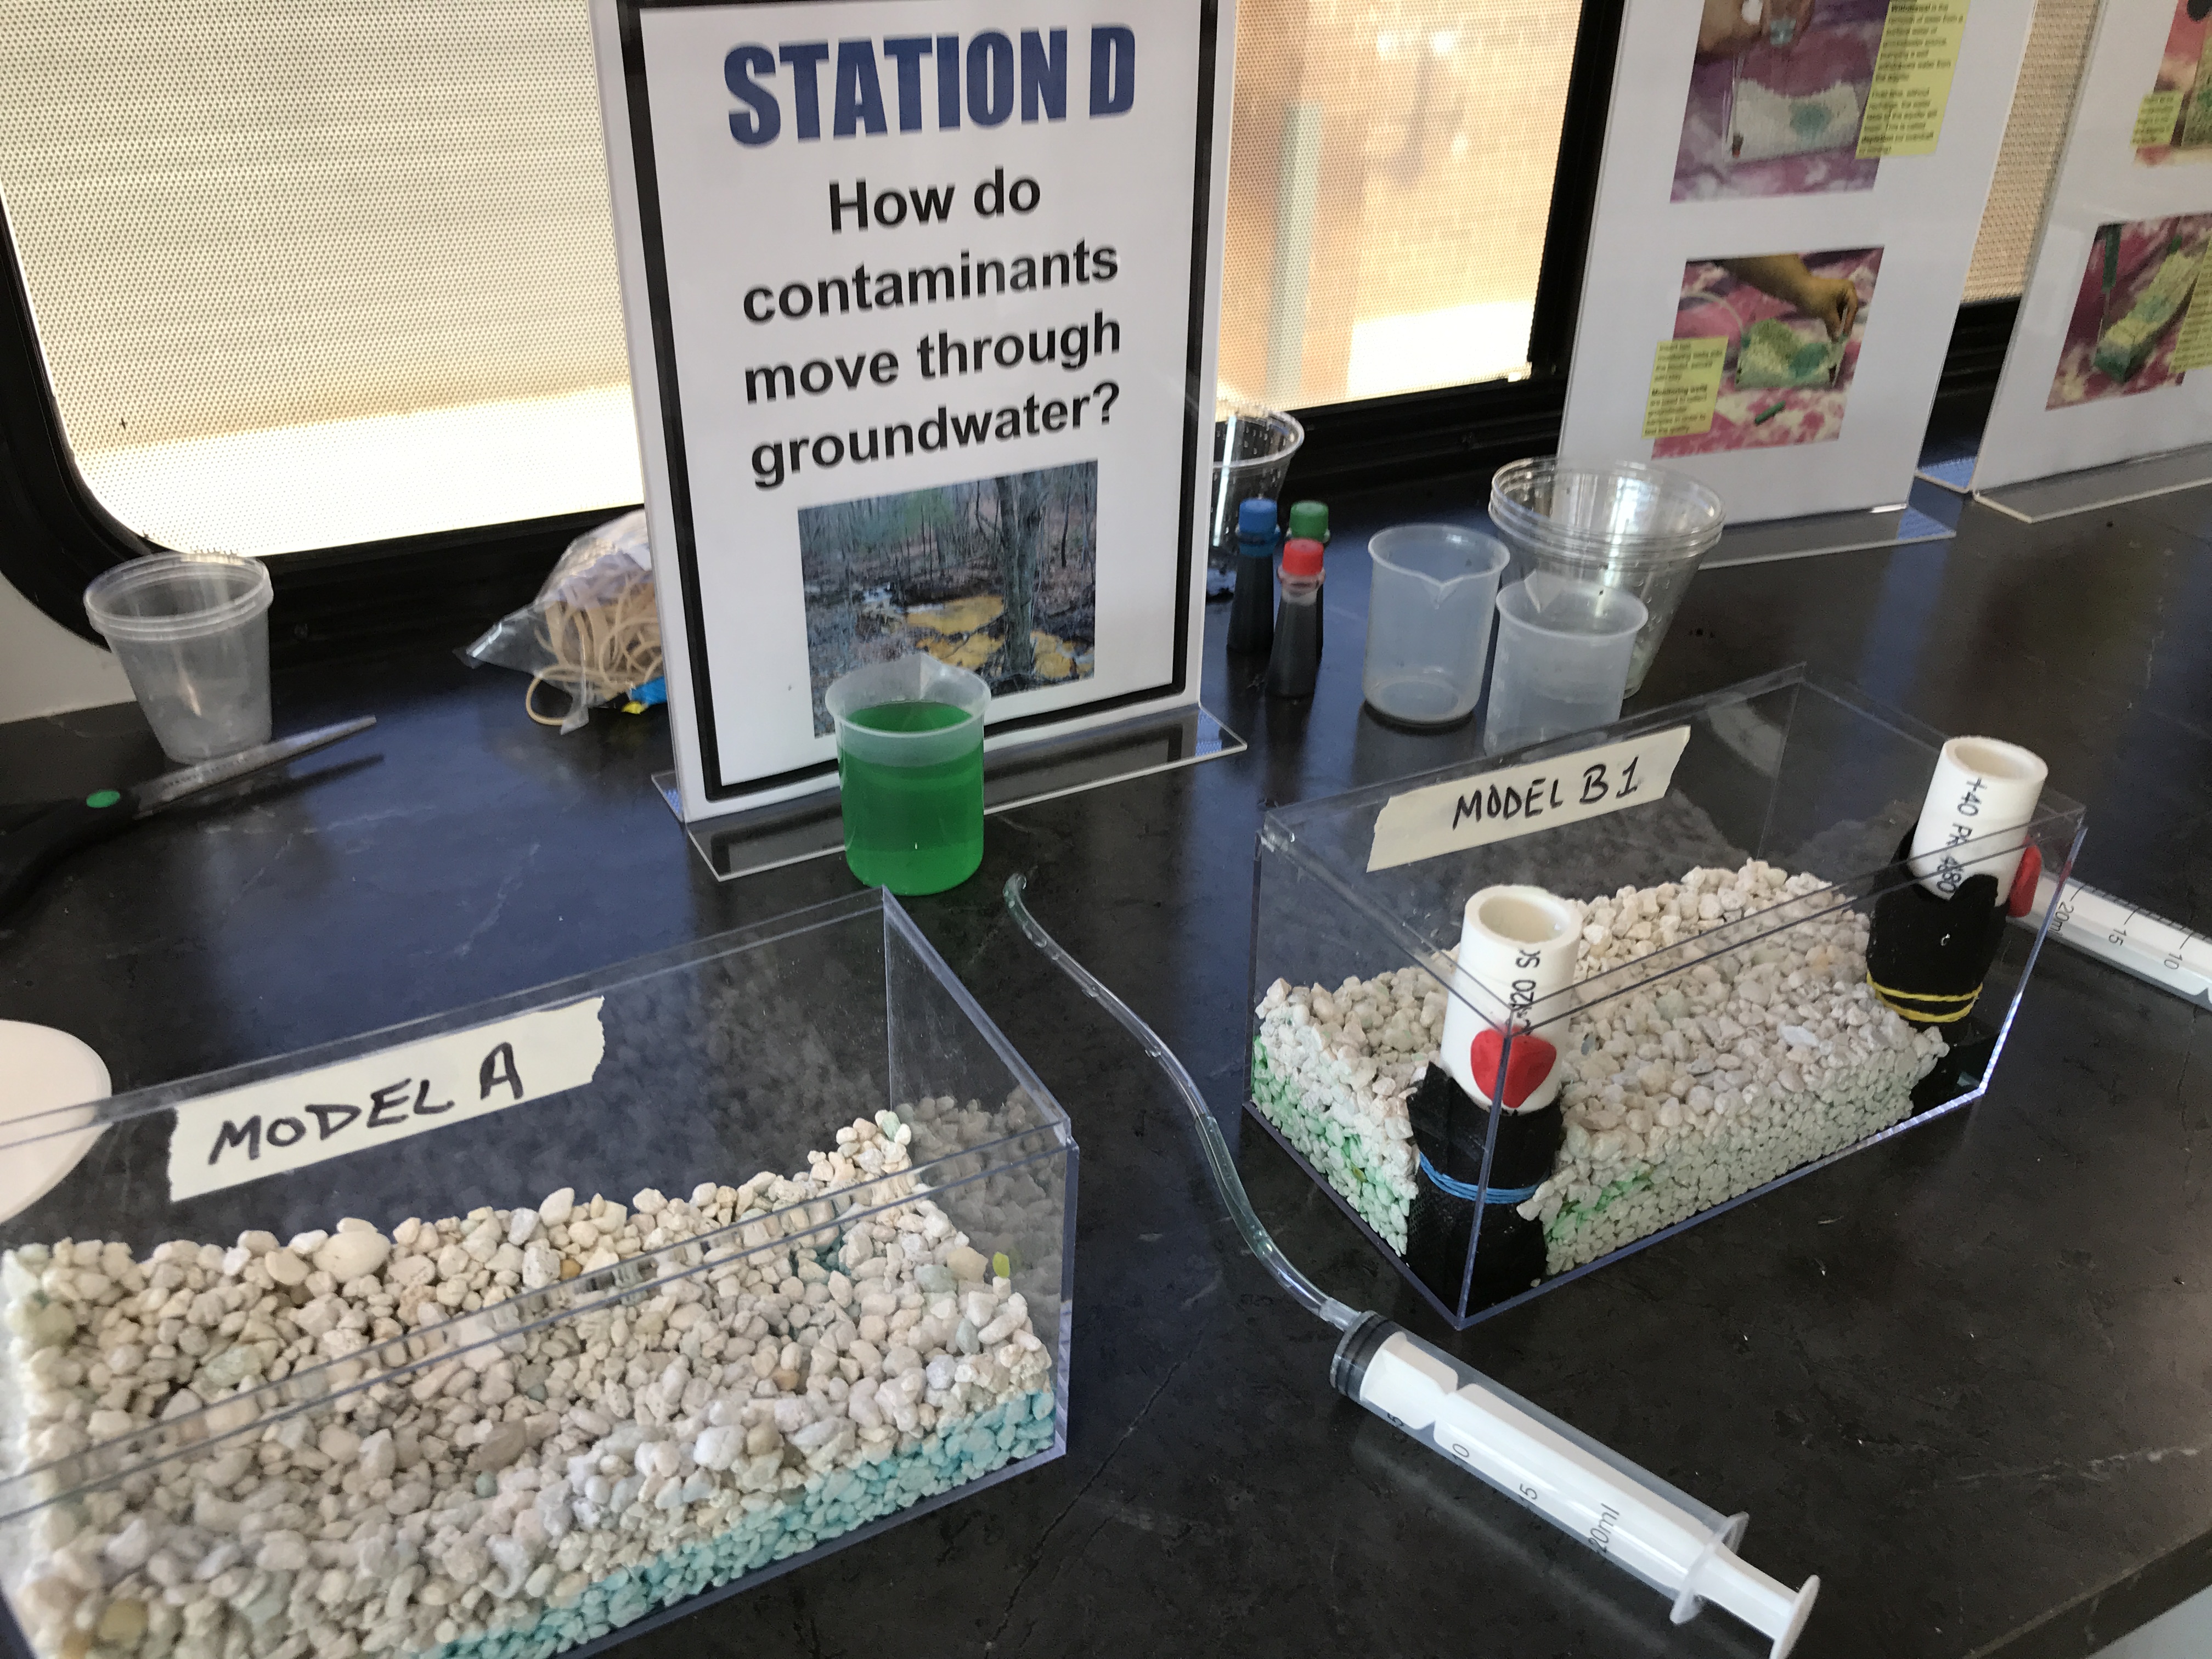 Examples of groundwater models used